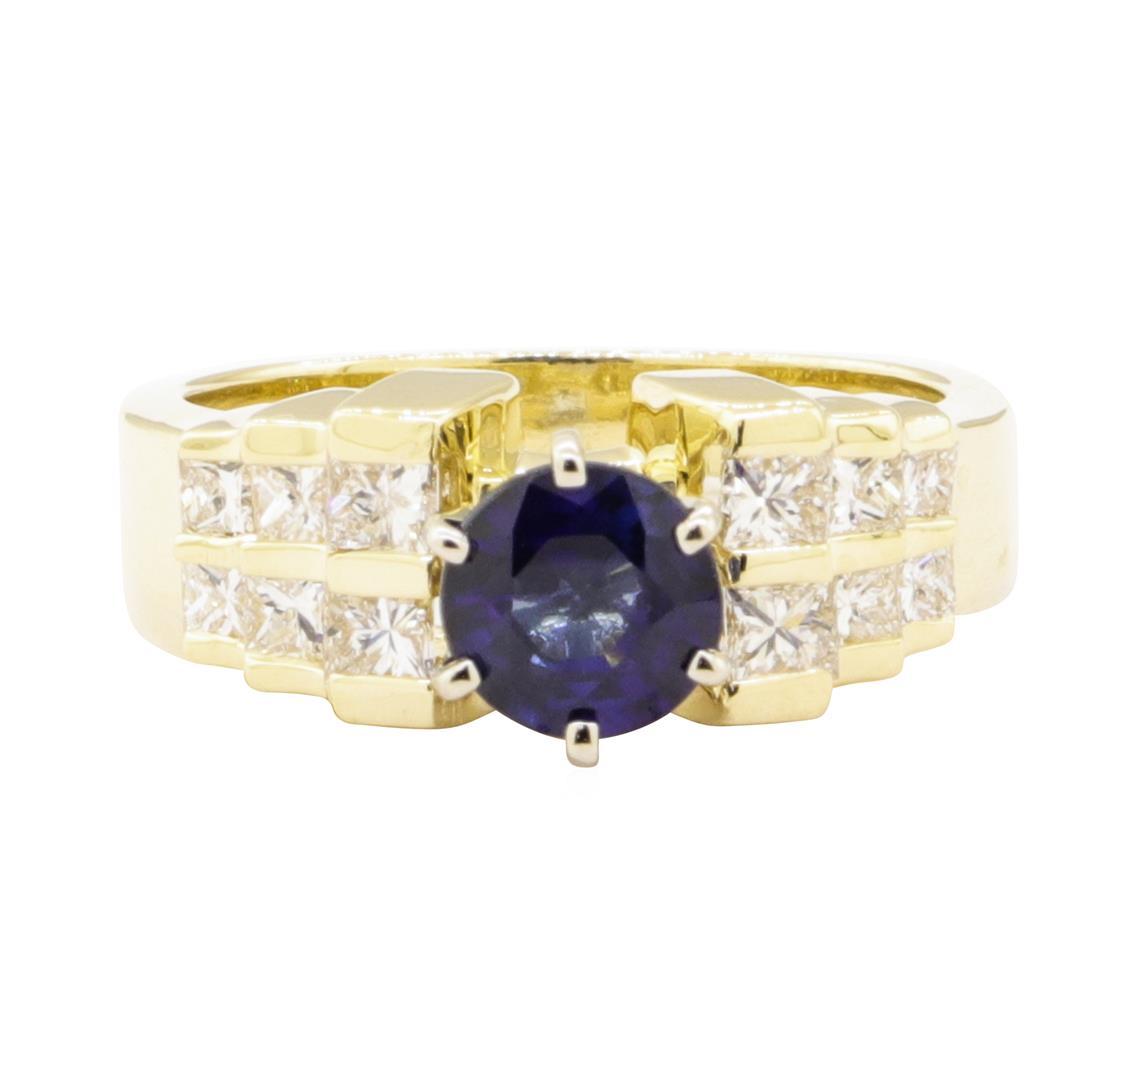 1.80 ctw Blue Sapphire And Diamond Ring - 14KT Yellow Gold